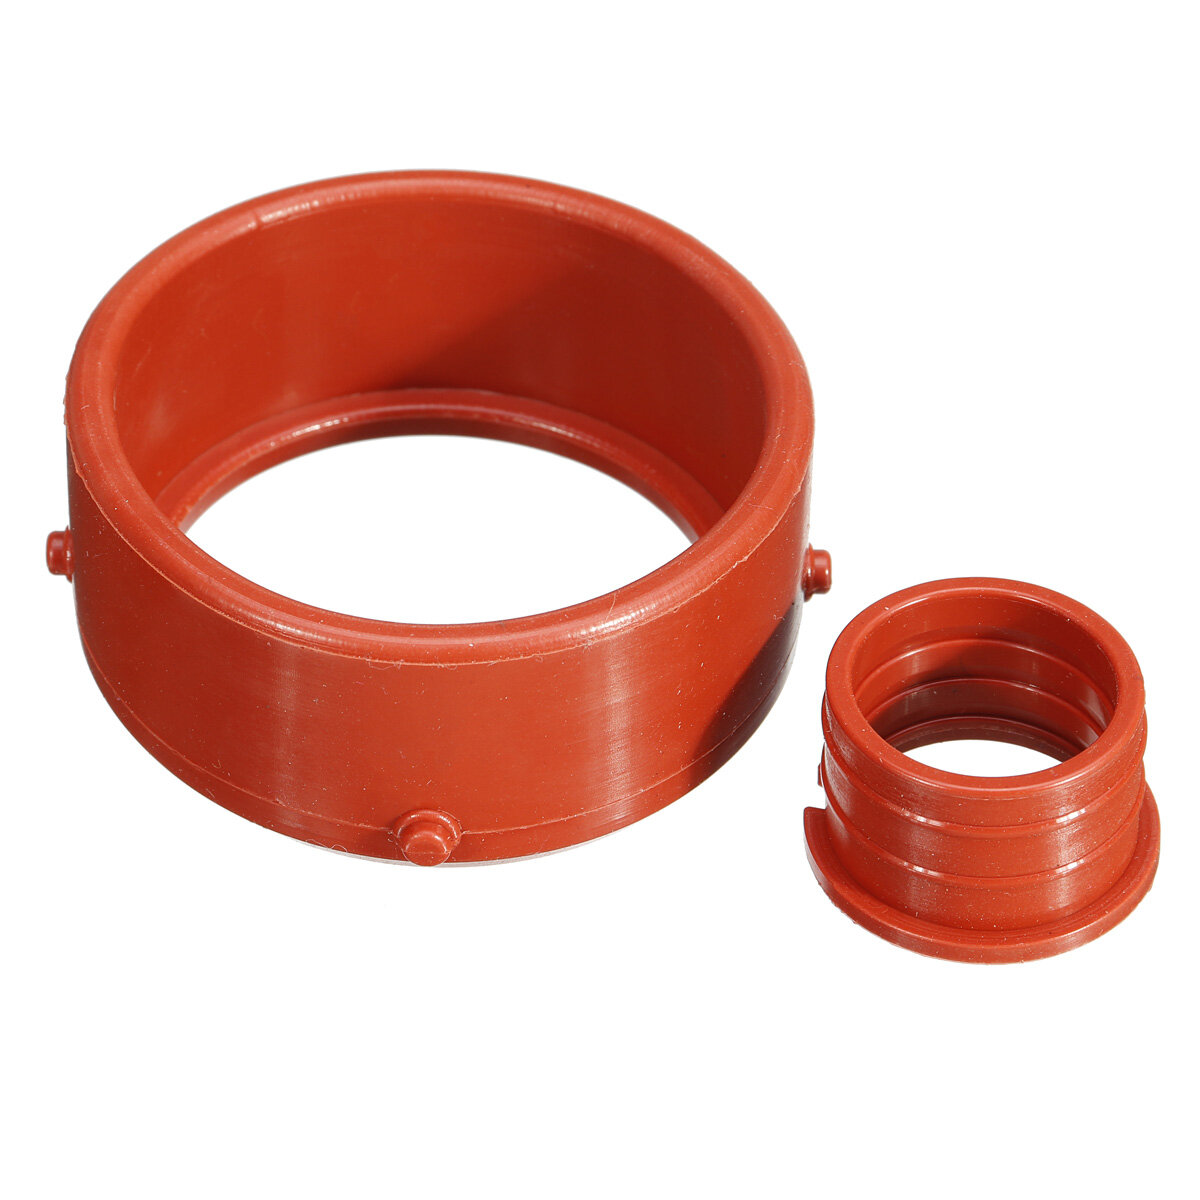 2 stks Rode Turbo & Breather Intake Seal Kit Voor Mercedes-Benz OM642 # A6420940080 # A6420940580